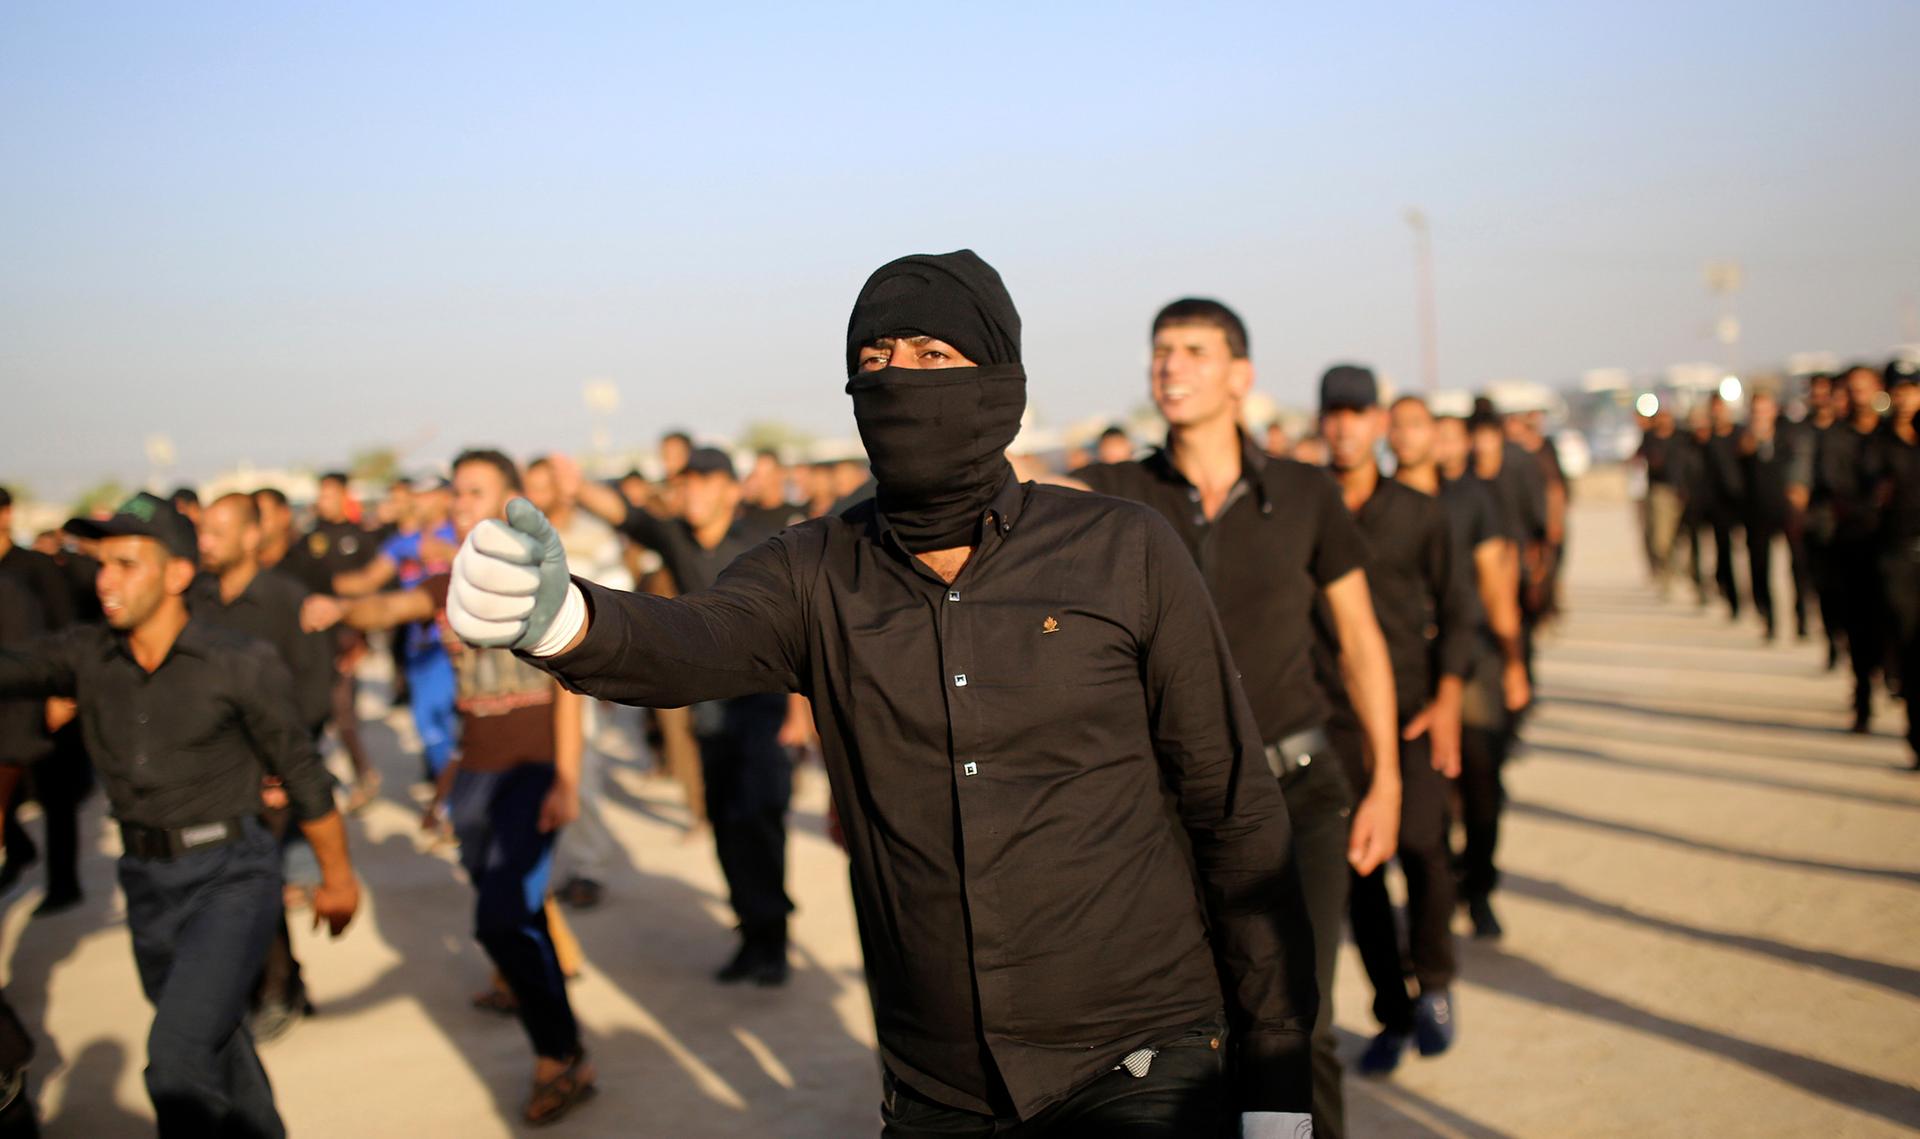 Mehdi Army fighters loyal to Shiite cleric Moqtada al-Sadr march during a military-style training in the holy city of Najaf, June 16, 2014.